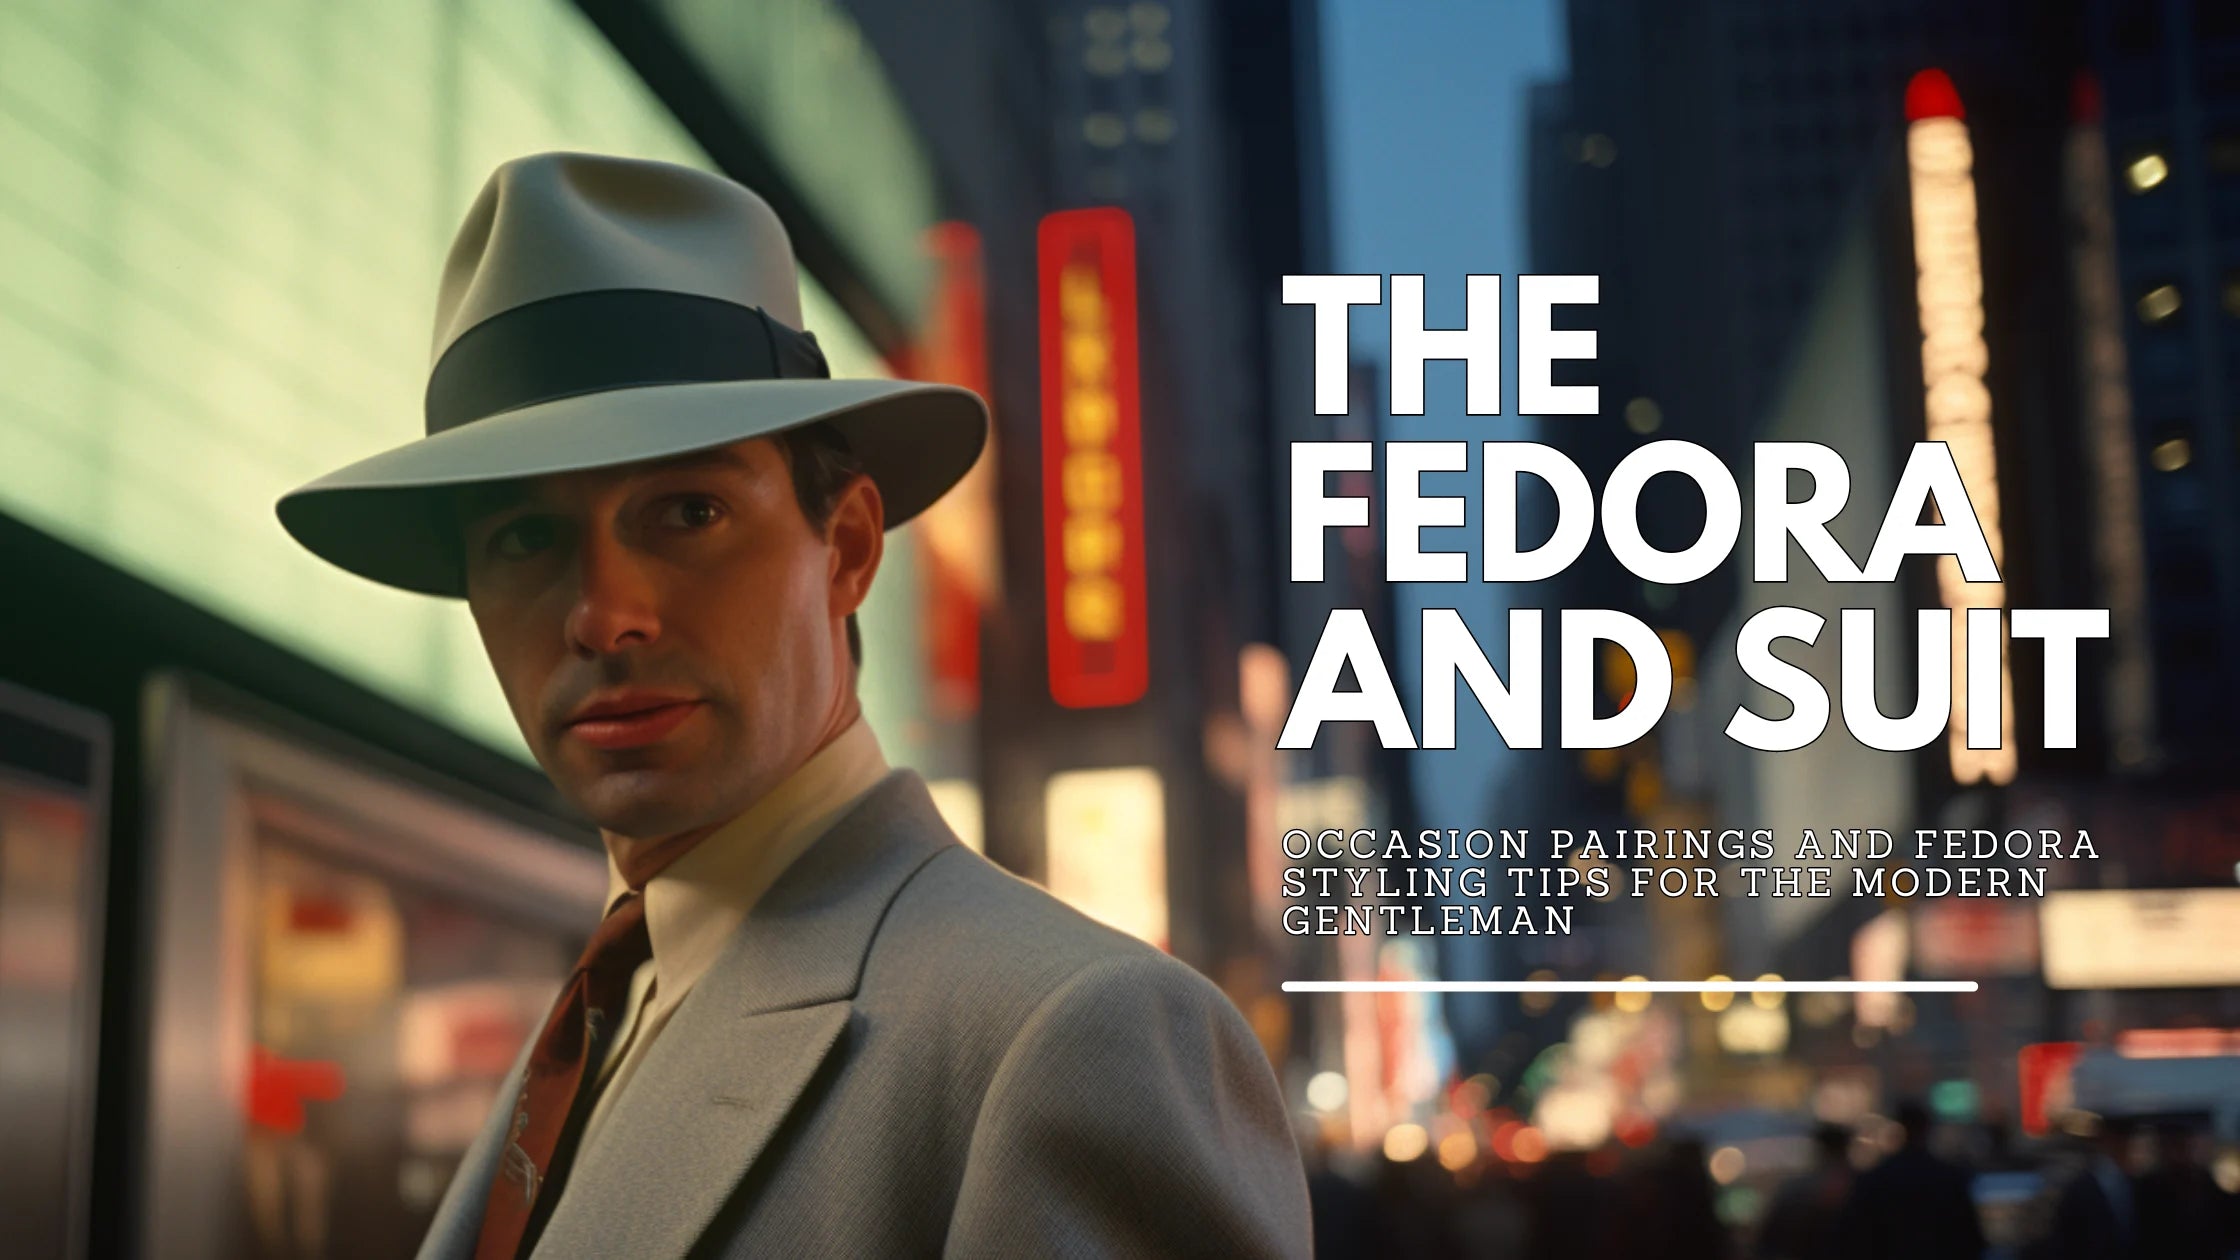 A man in a suit and fedora stands against a twilight city backdrop. City lights contrast the evening sky. Text reads 'THE FEDORA AND SUIT' with a subtitle on styling tips for the modern gentleman.